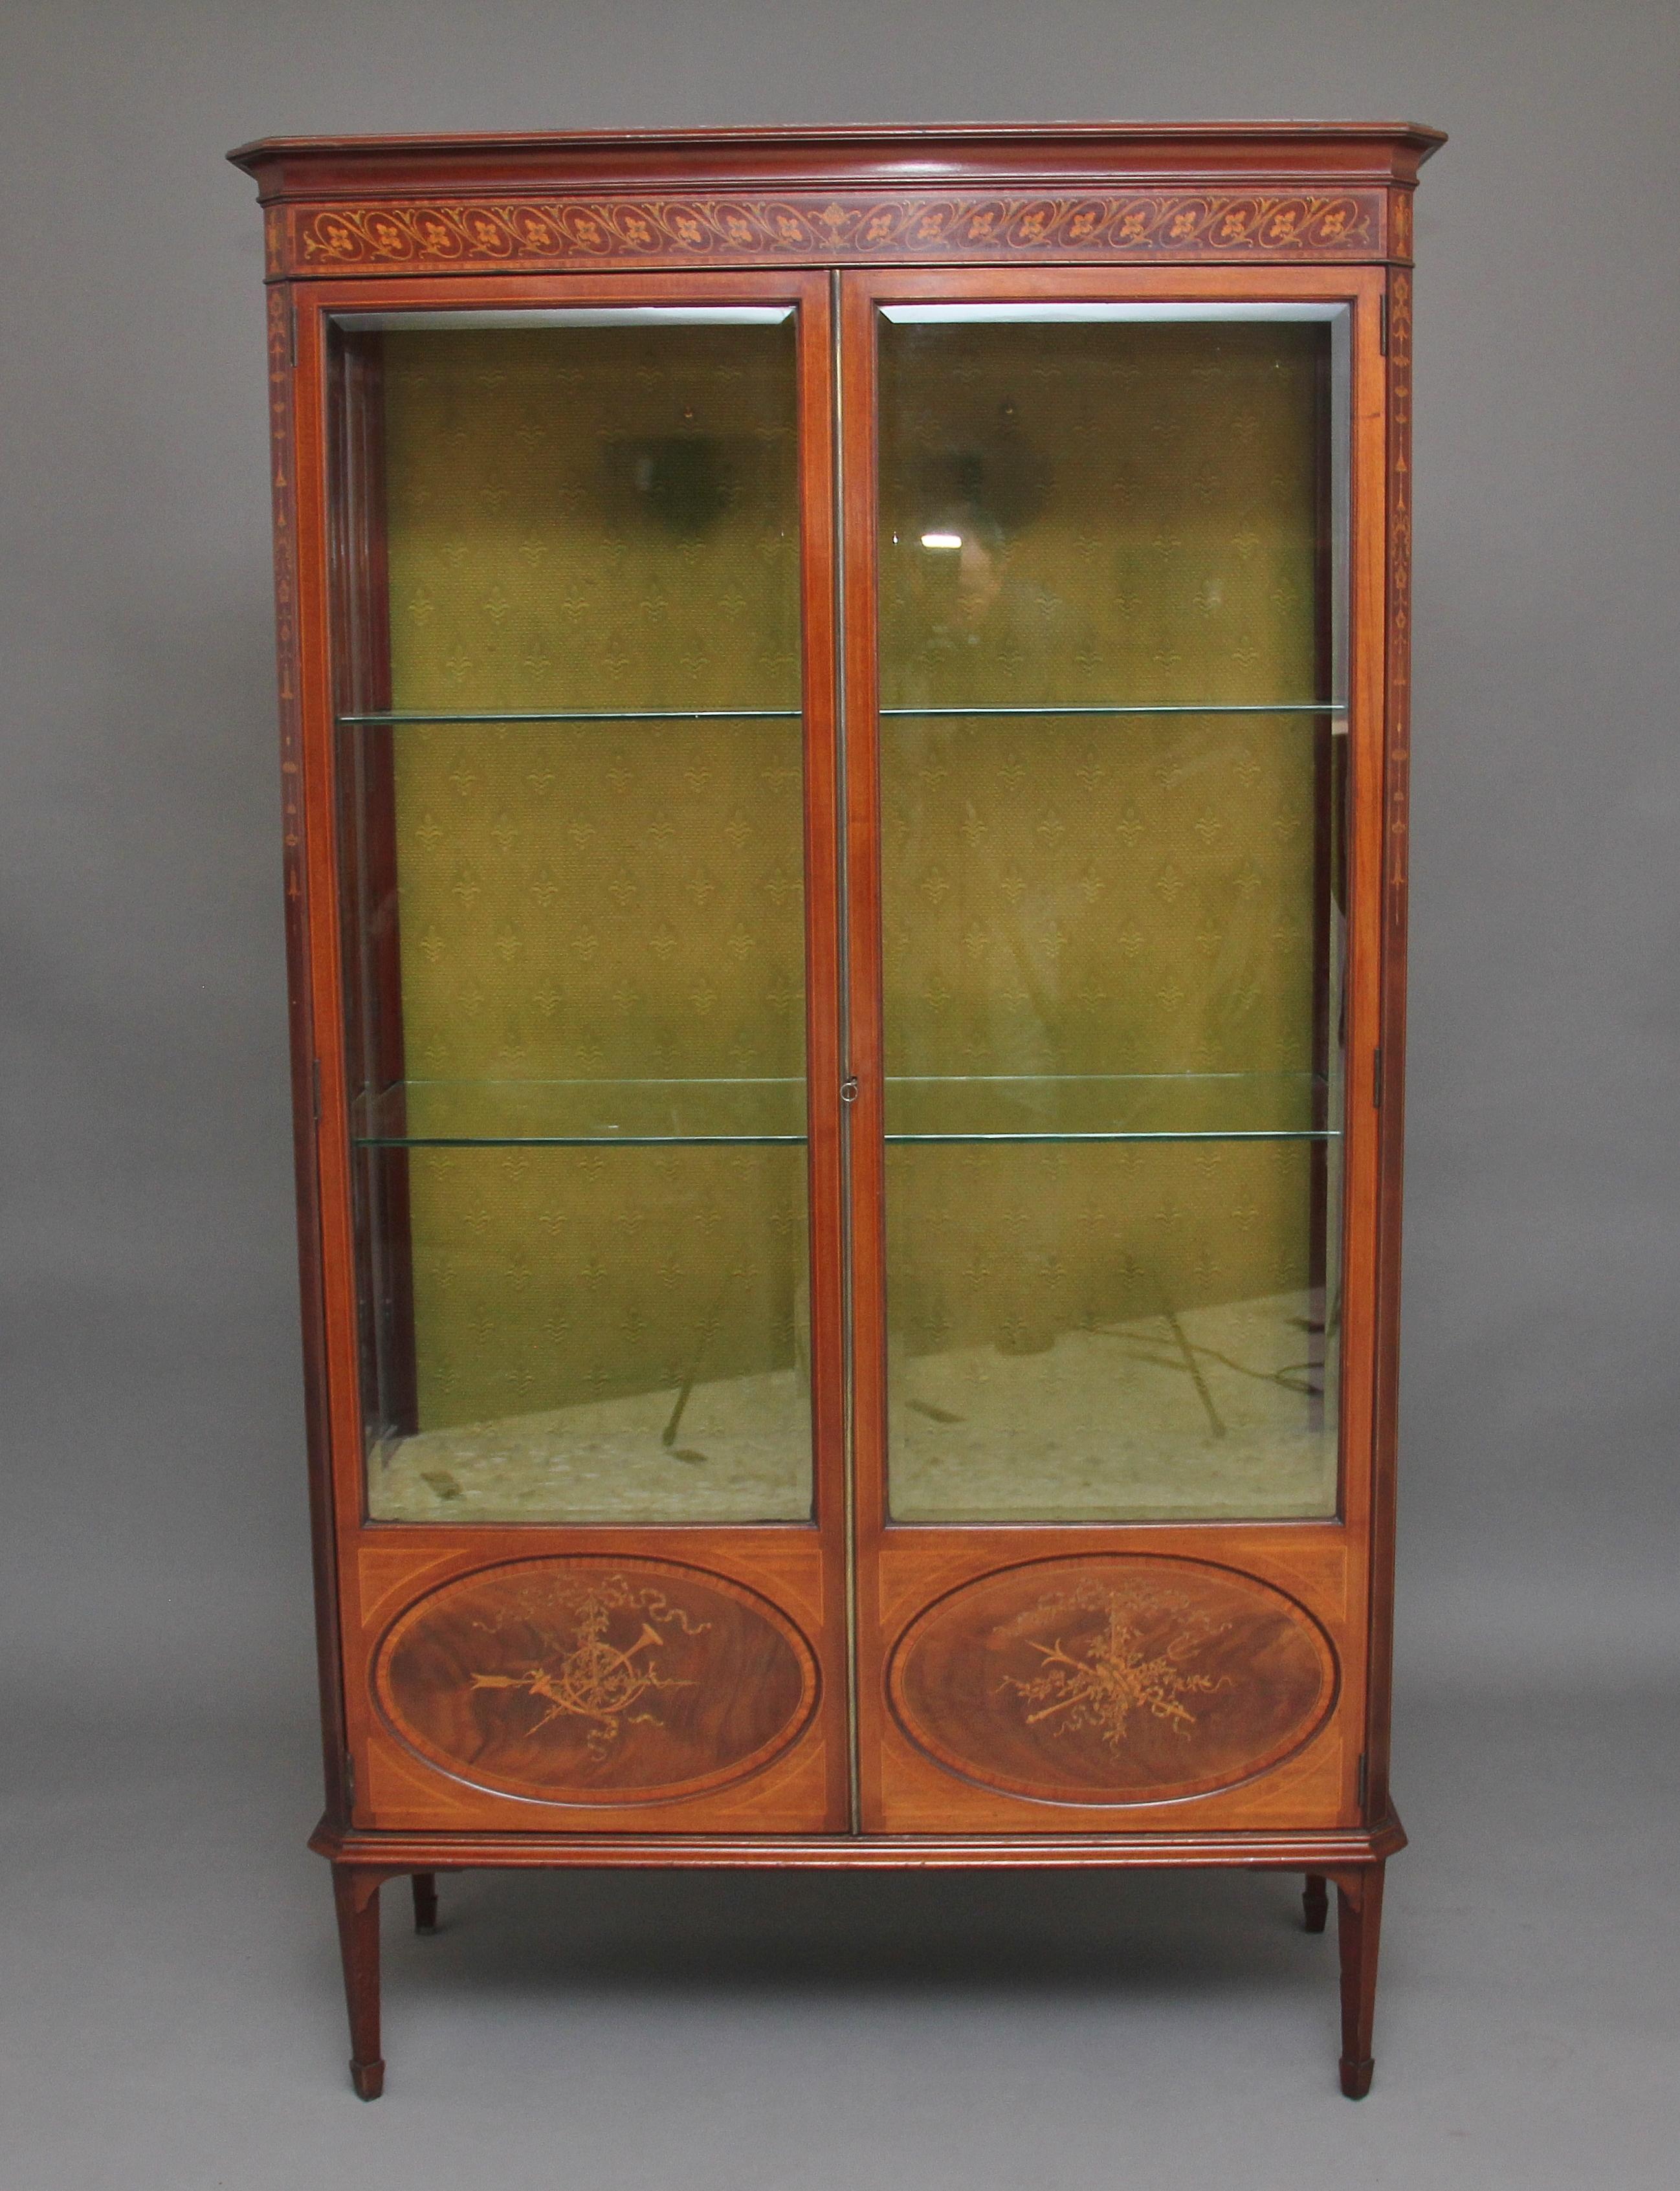 19th century mahogany and inlaid display cabinet, the shaped cornice above an inlaid frieze, two glazed doors below opening to reveal two glass shelves inside, the bottom of each door having oval panels inlaid with decorative patterns, the corners